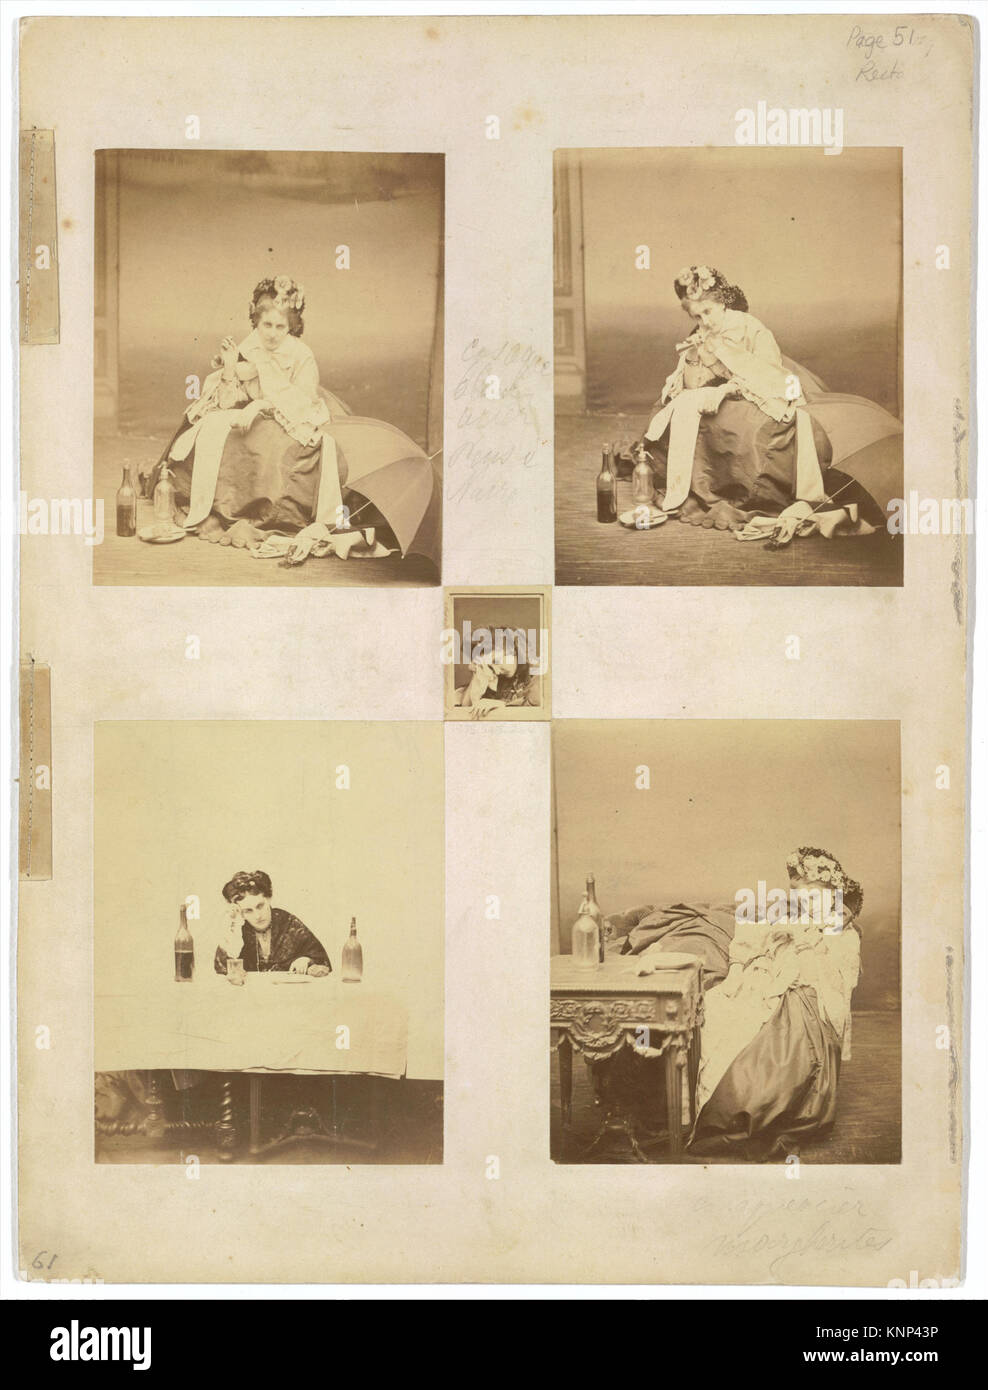 -Album page with ten photographs of La Comtesse mounted recto and verso- MET DT10614 684336 Stock Photo